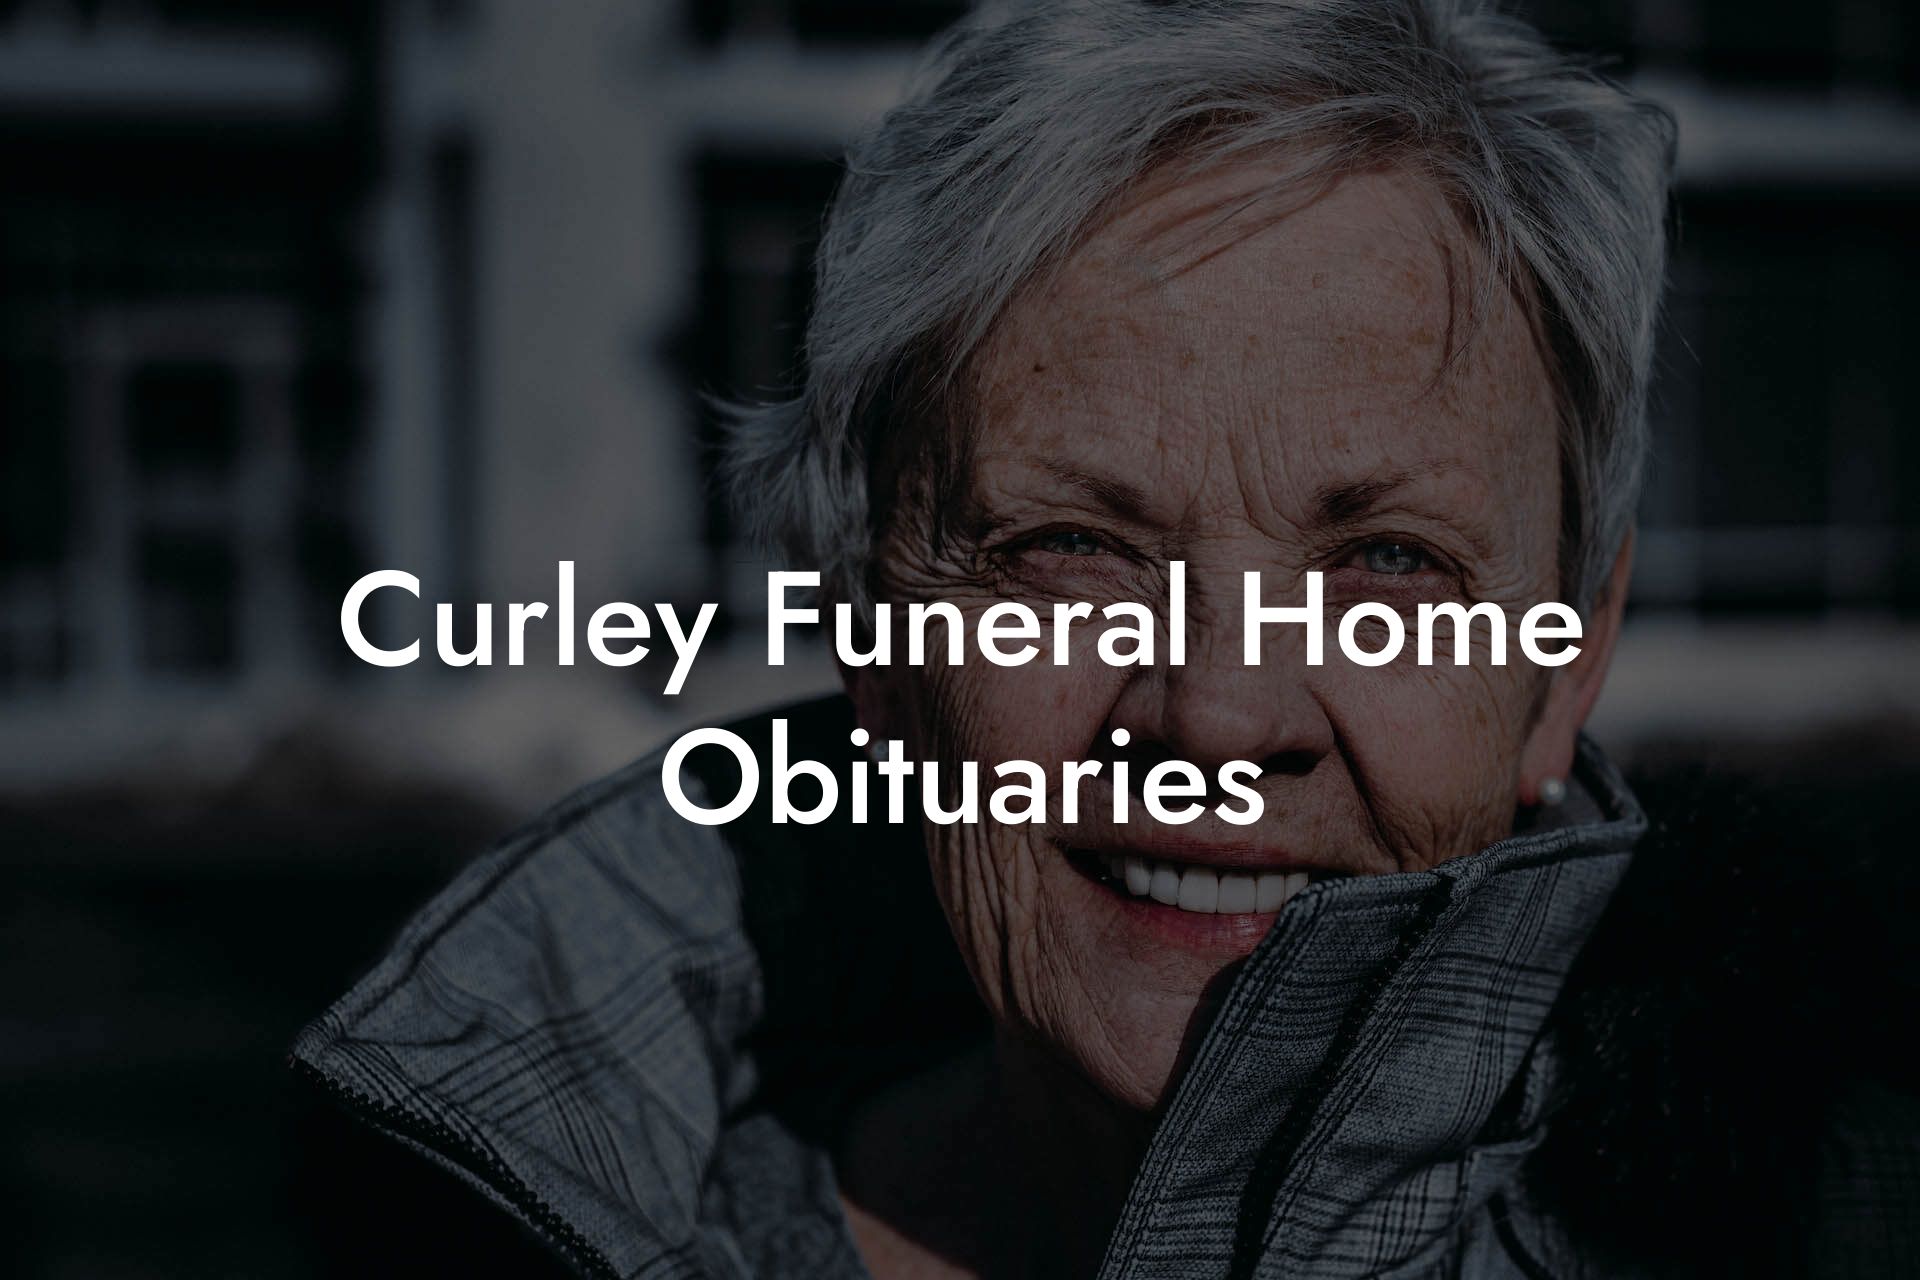 Curley Funeral Home Obituaries